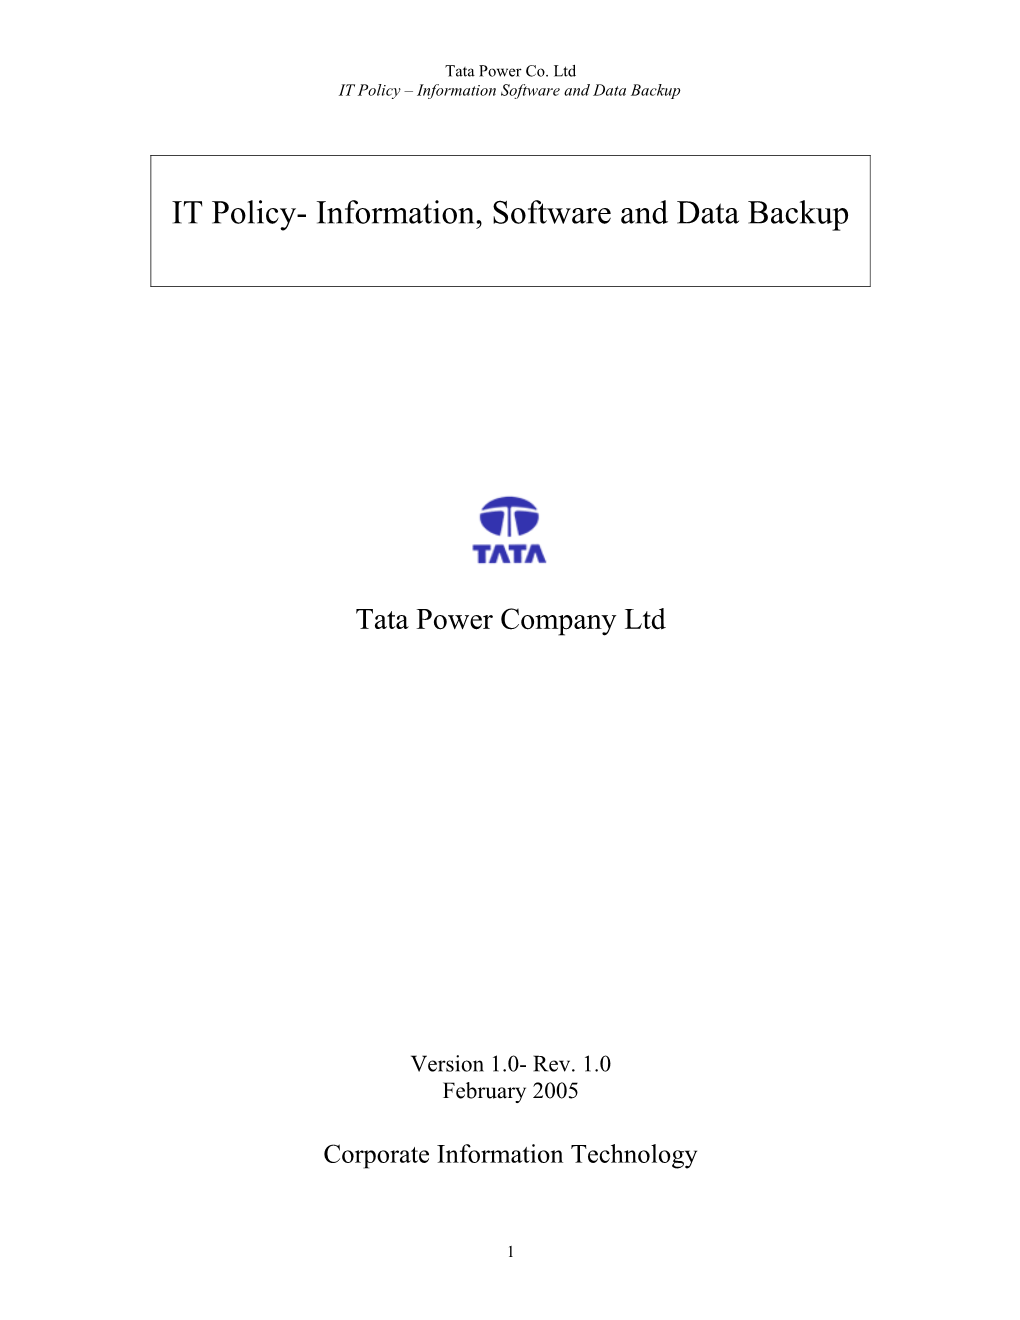 Tata Power IT Policy for Providing E-Mail Facility to Employees and Third Parties